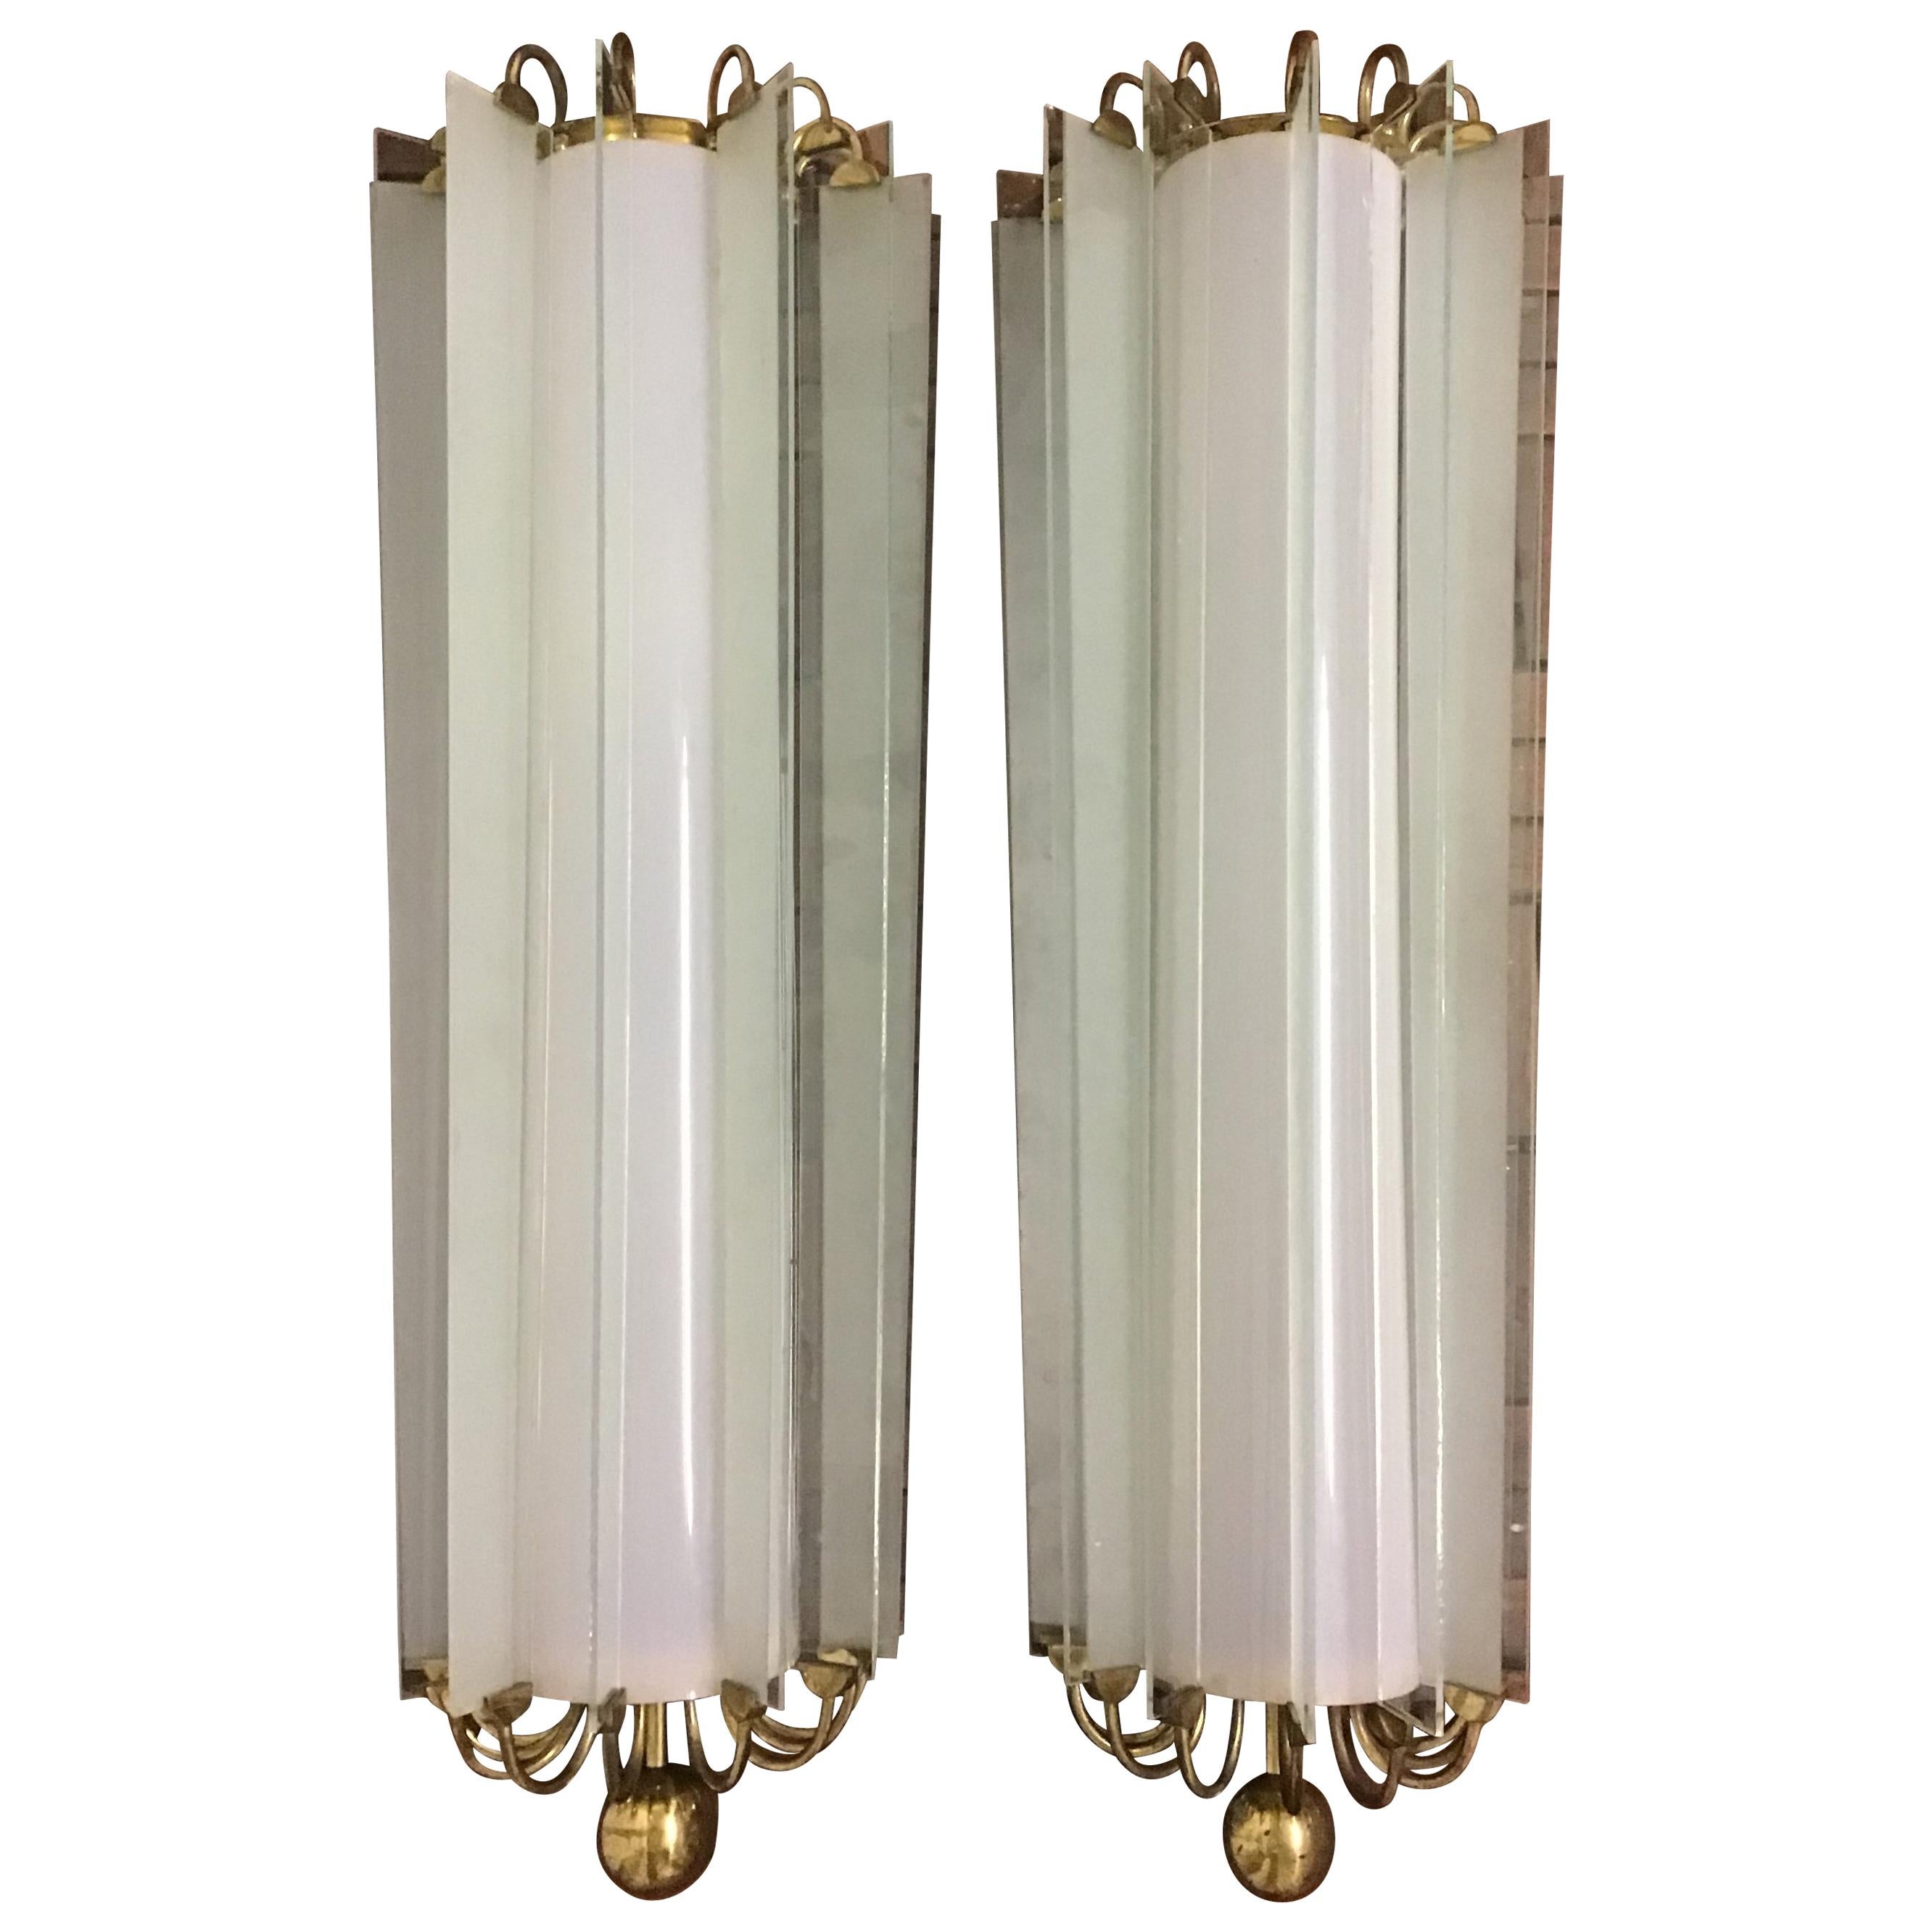 Pair of Art Deco Wall Sconces, Bauhaus, Germany, 1930s